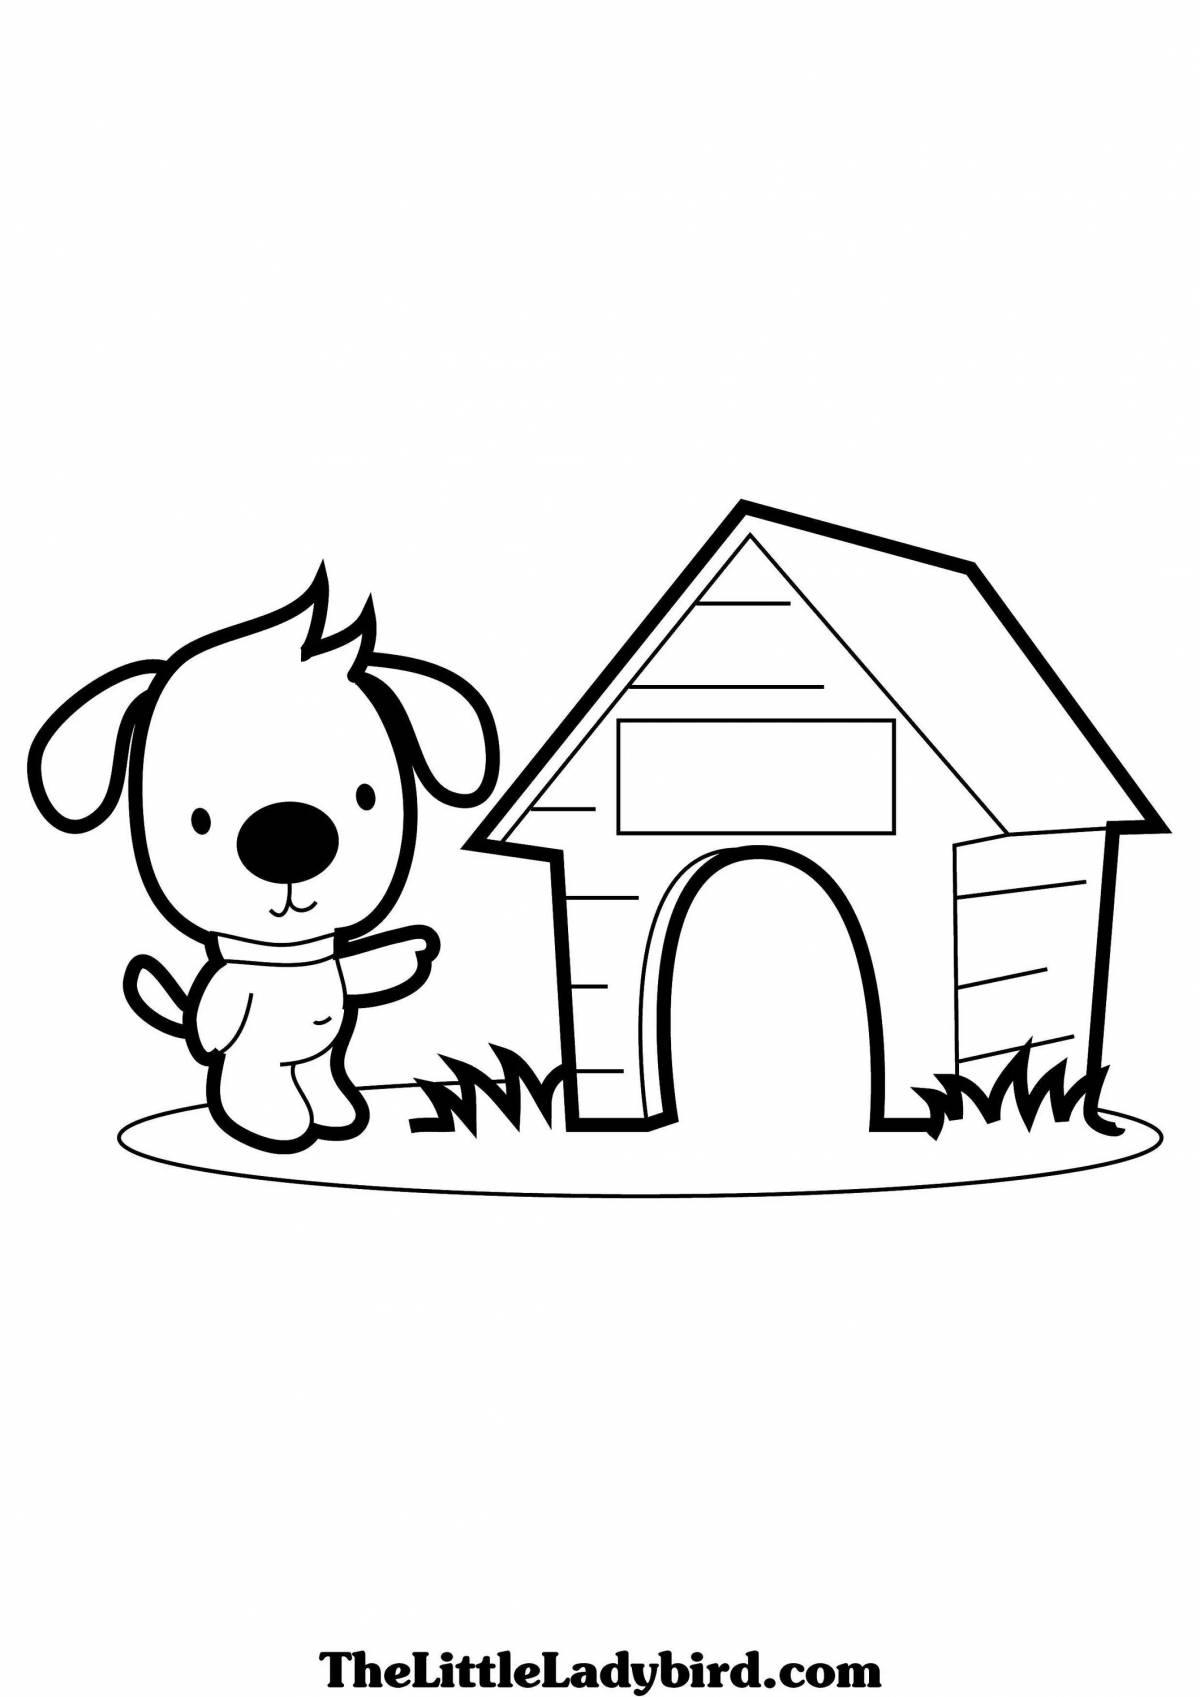 Coloring page elegant doghouse